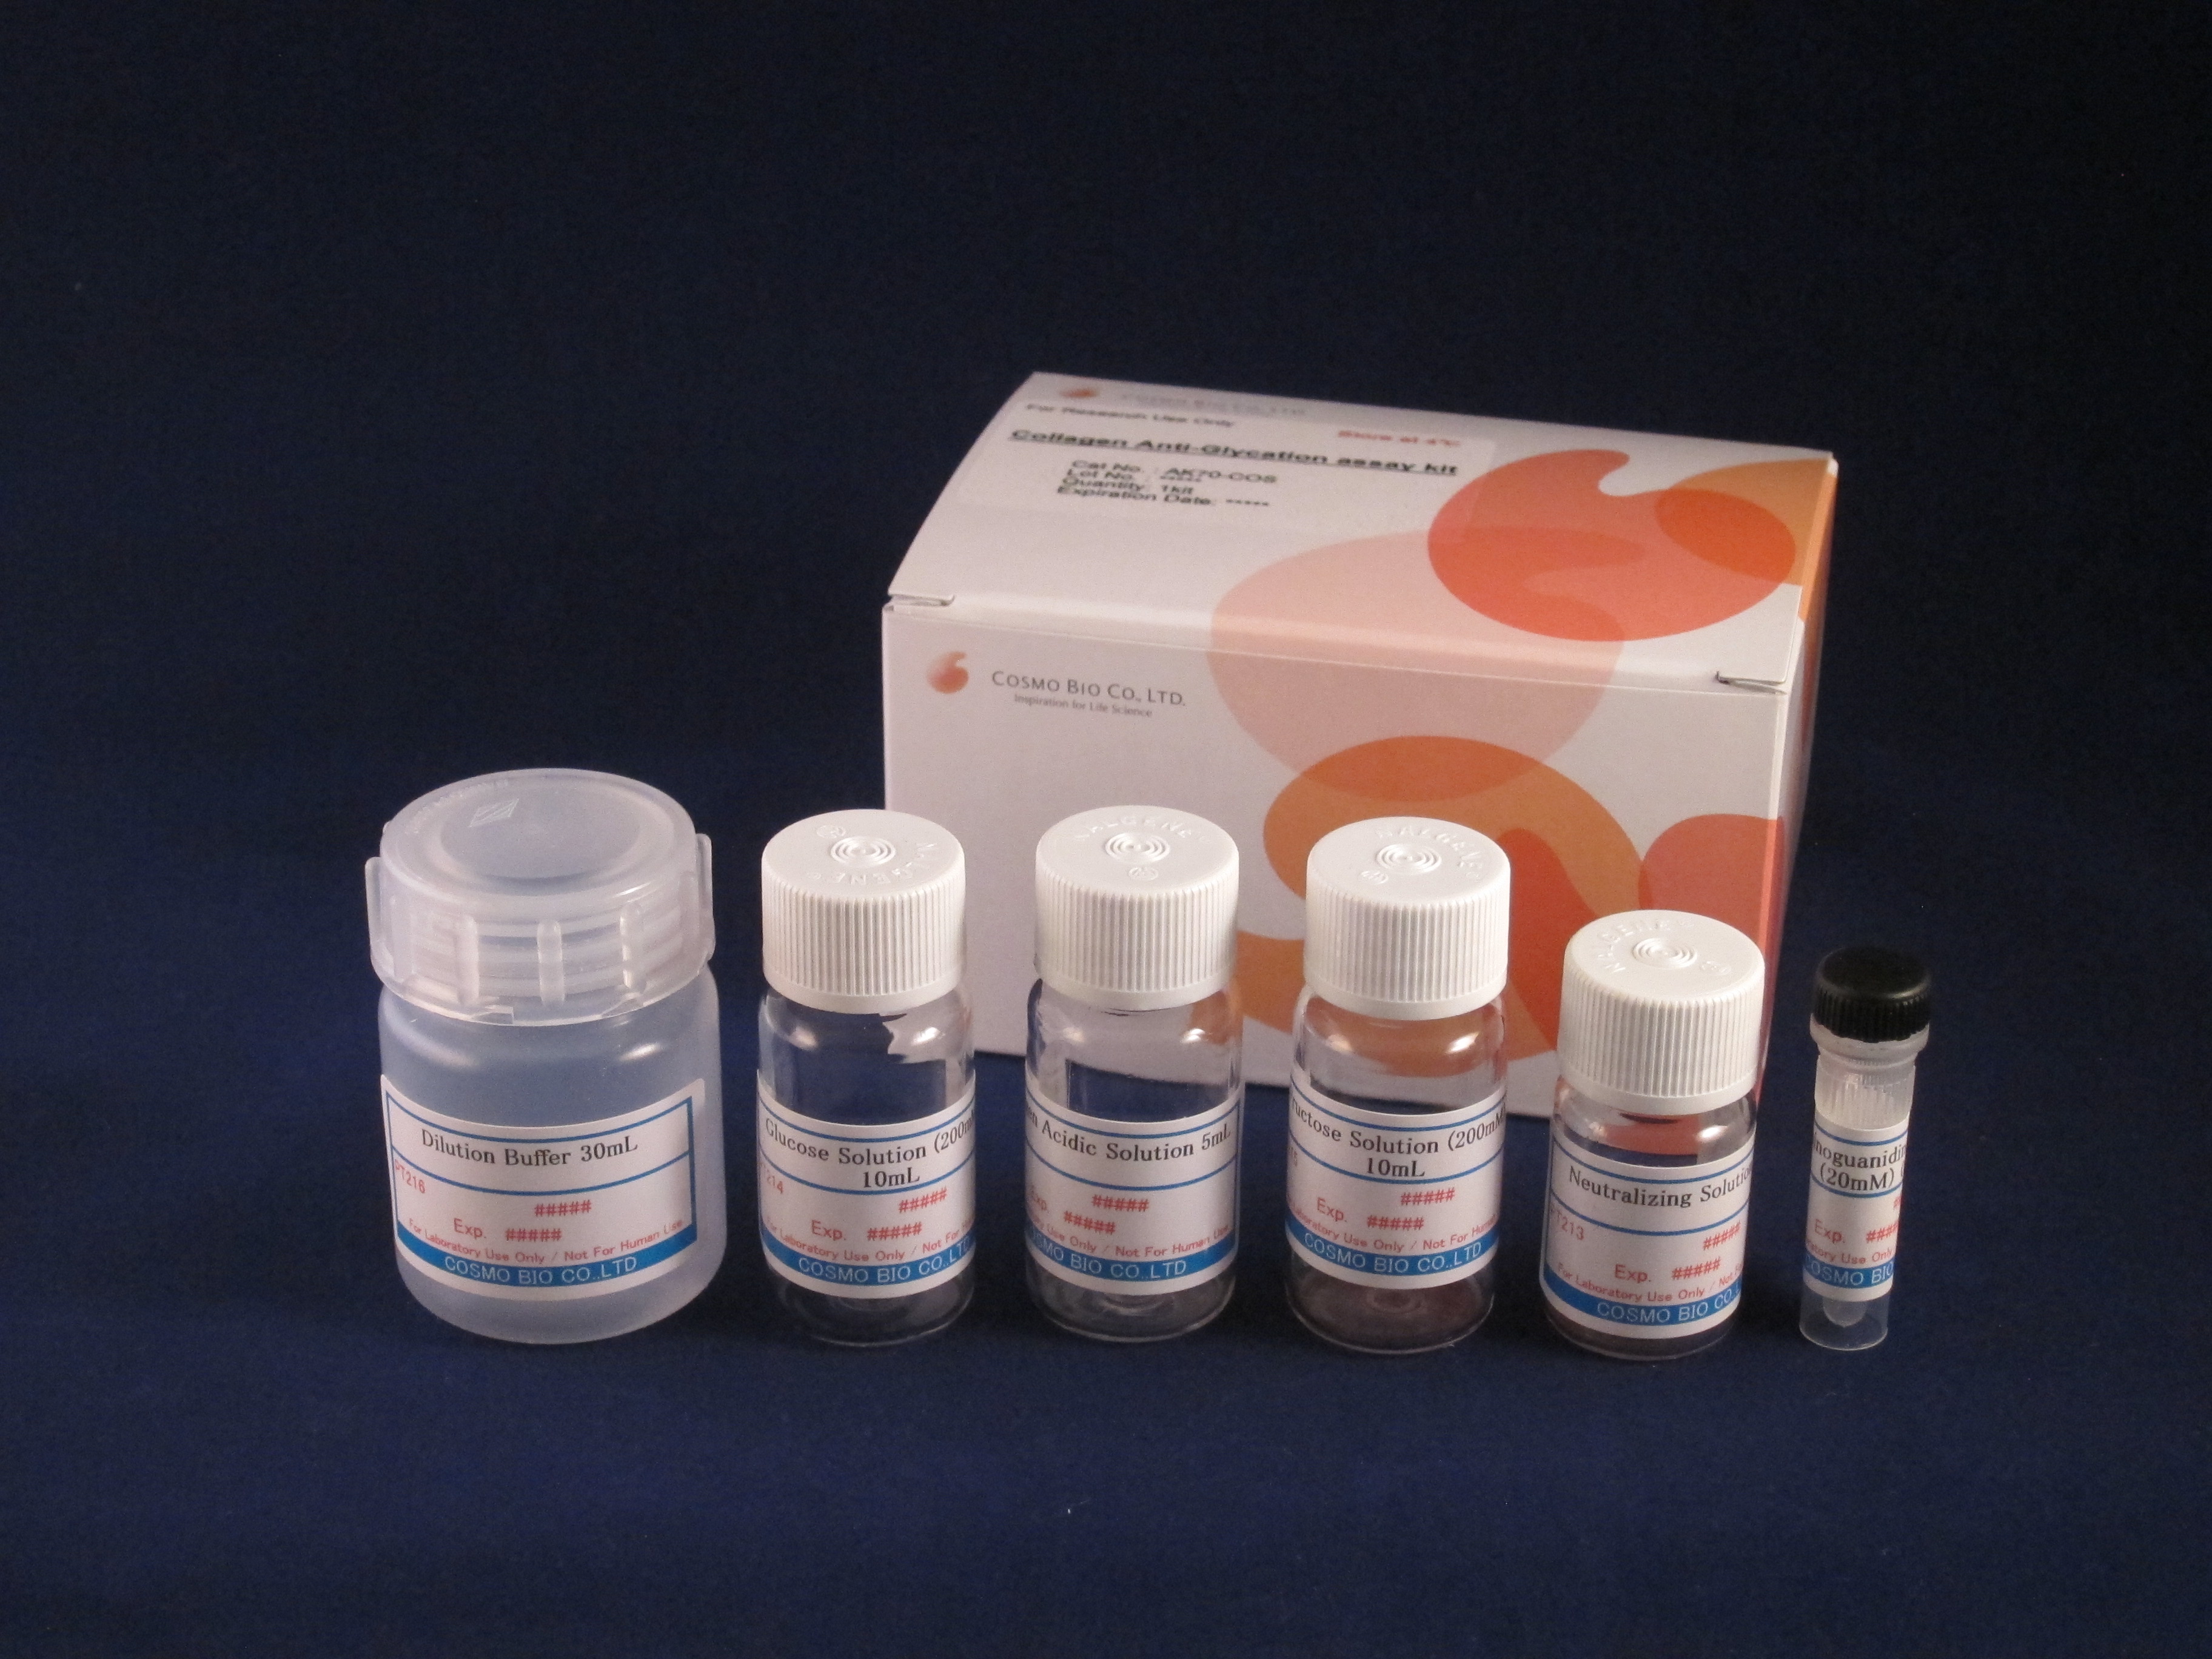 Collagen Glycation Assay Kit Glucose Fructose Cosmo Bio Co Ltd